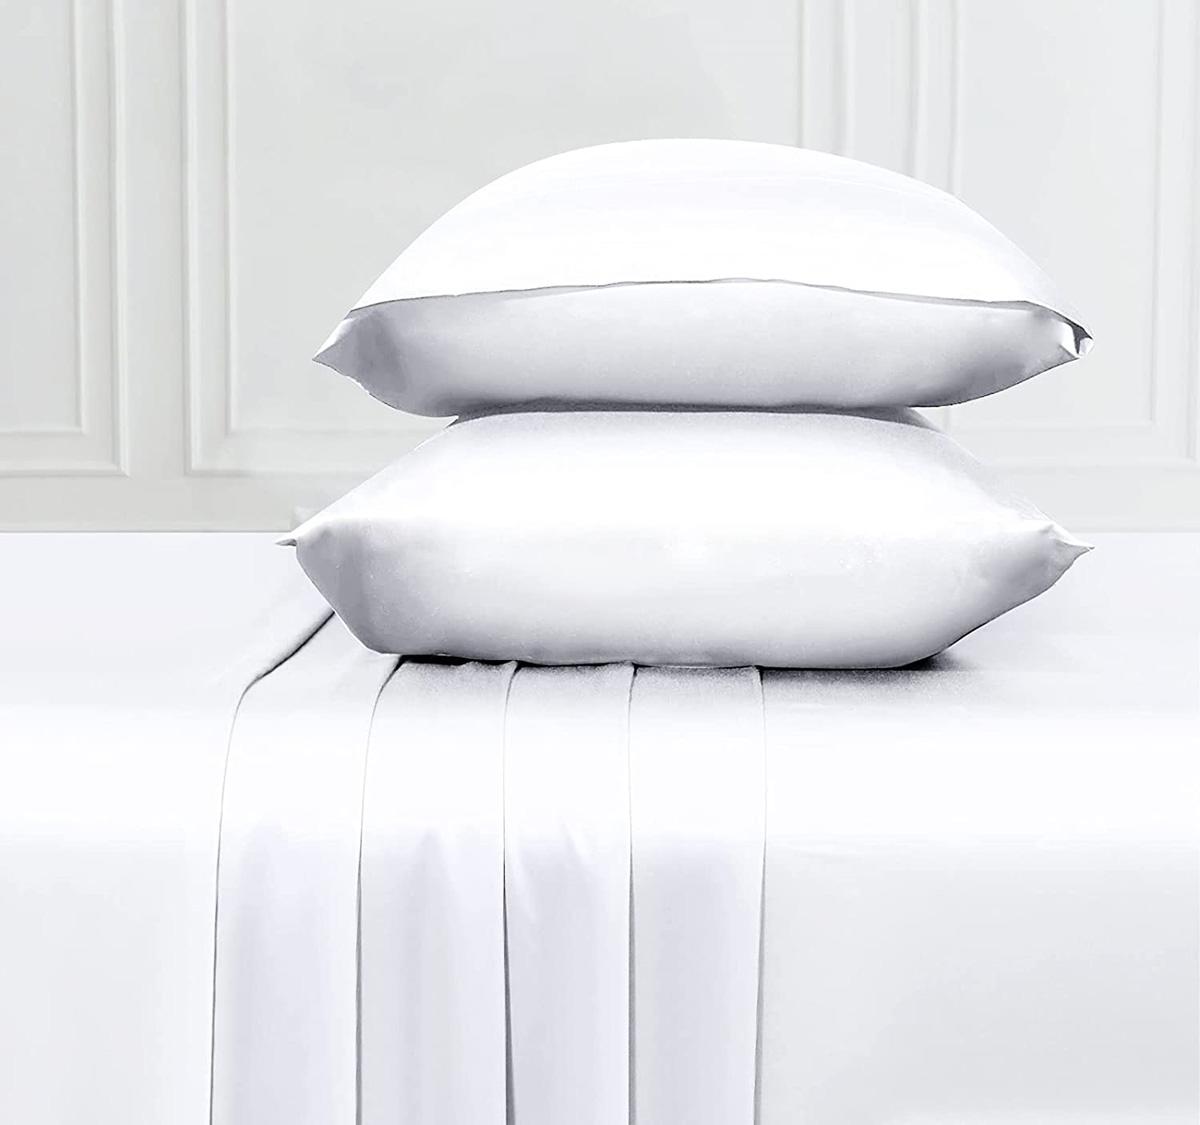 King Size Luxury Hotel Bamboo Bed Sheets for $49.97 Shipped